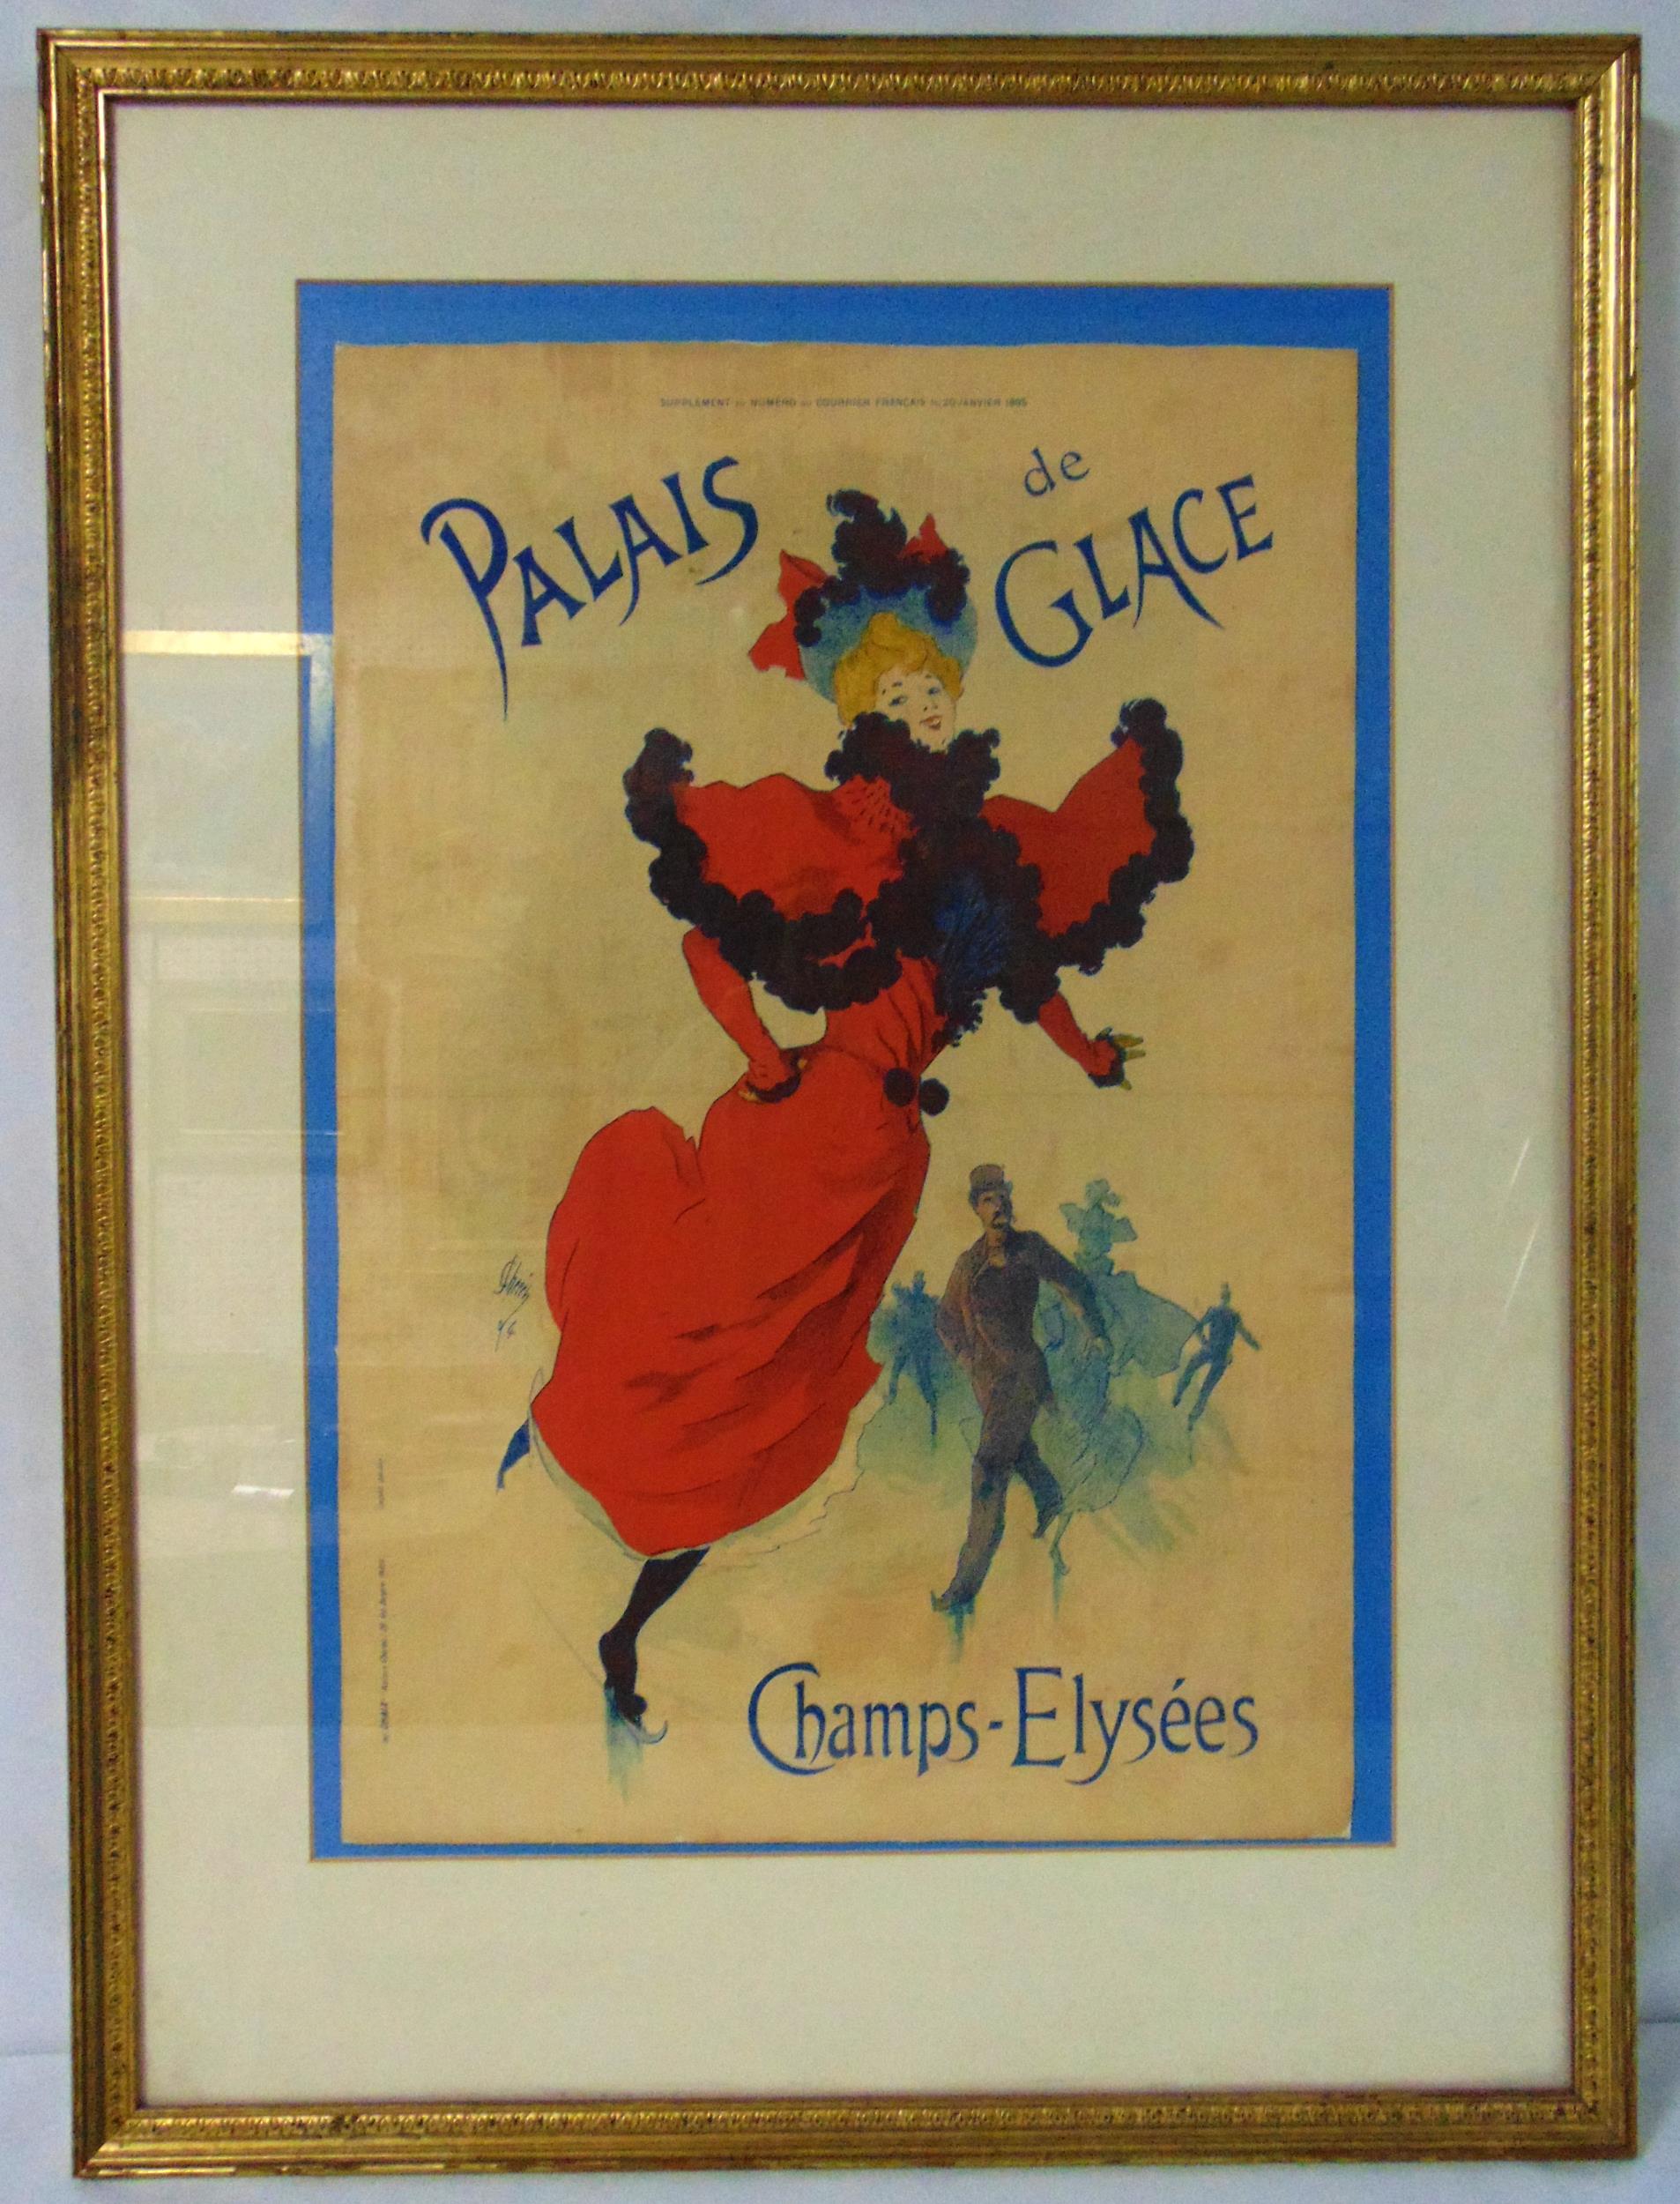 A framed and glazed polychromatic vintage poster Palais de Glace Champs Elysees, 56.5 x 39cm